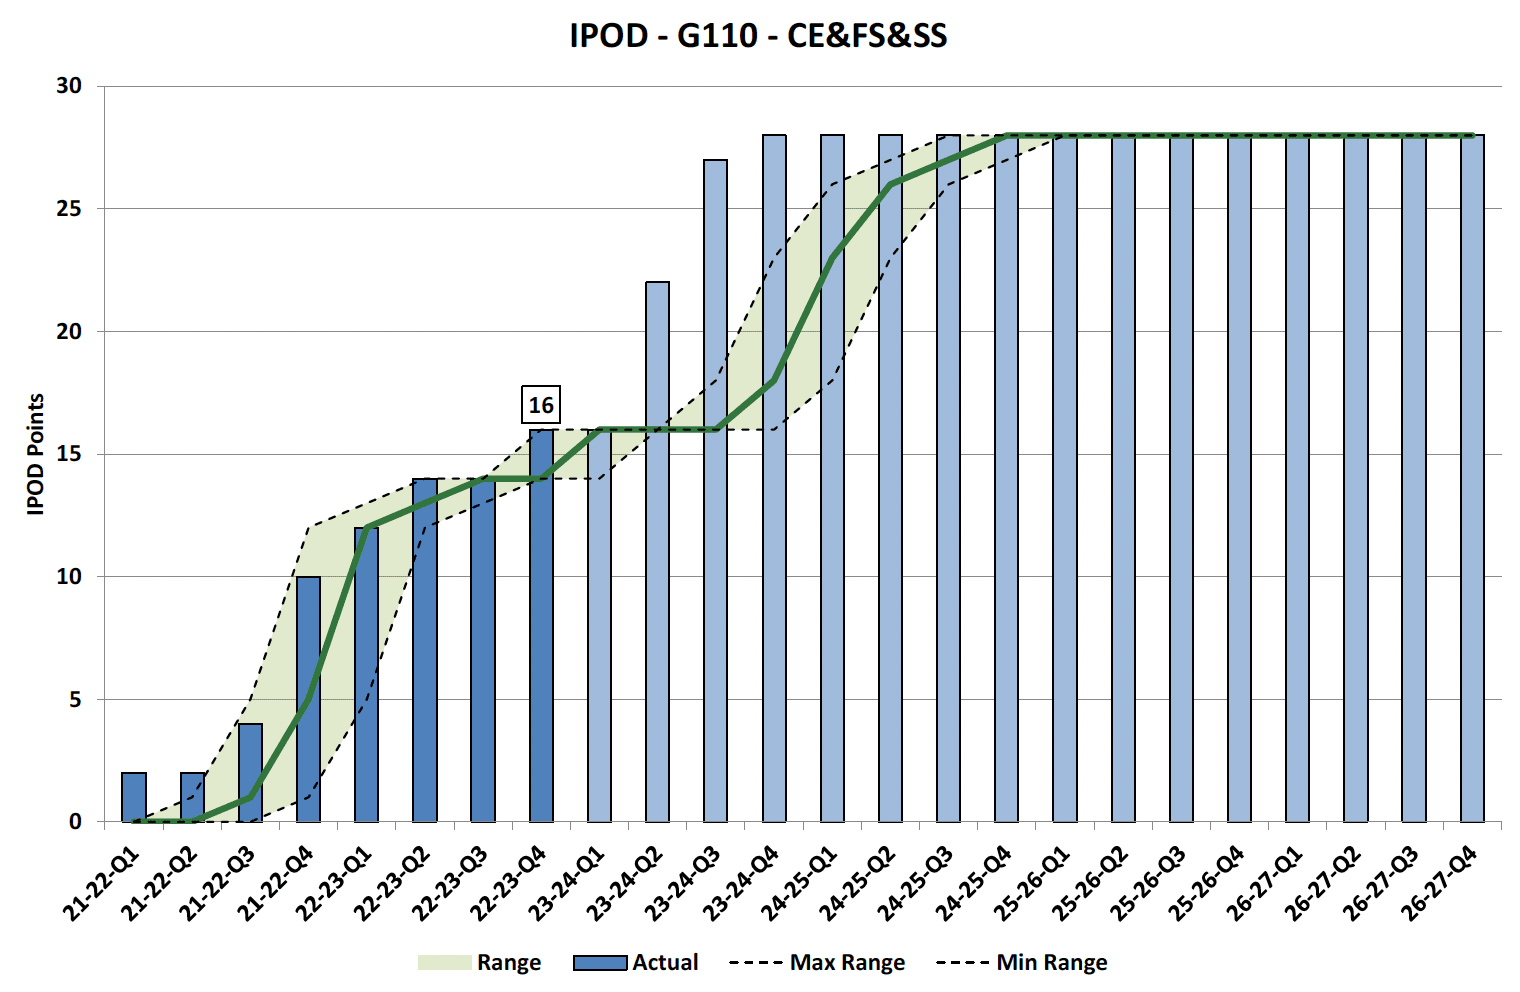 Chart showing IPOD points achieved or forecast for Financial Completion milestone against target range for all projects in CE&FS&SS Portfolio